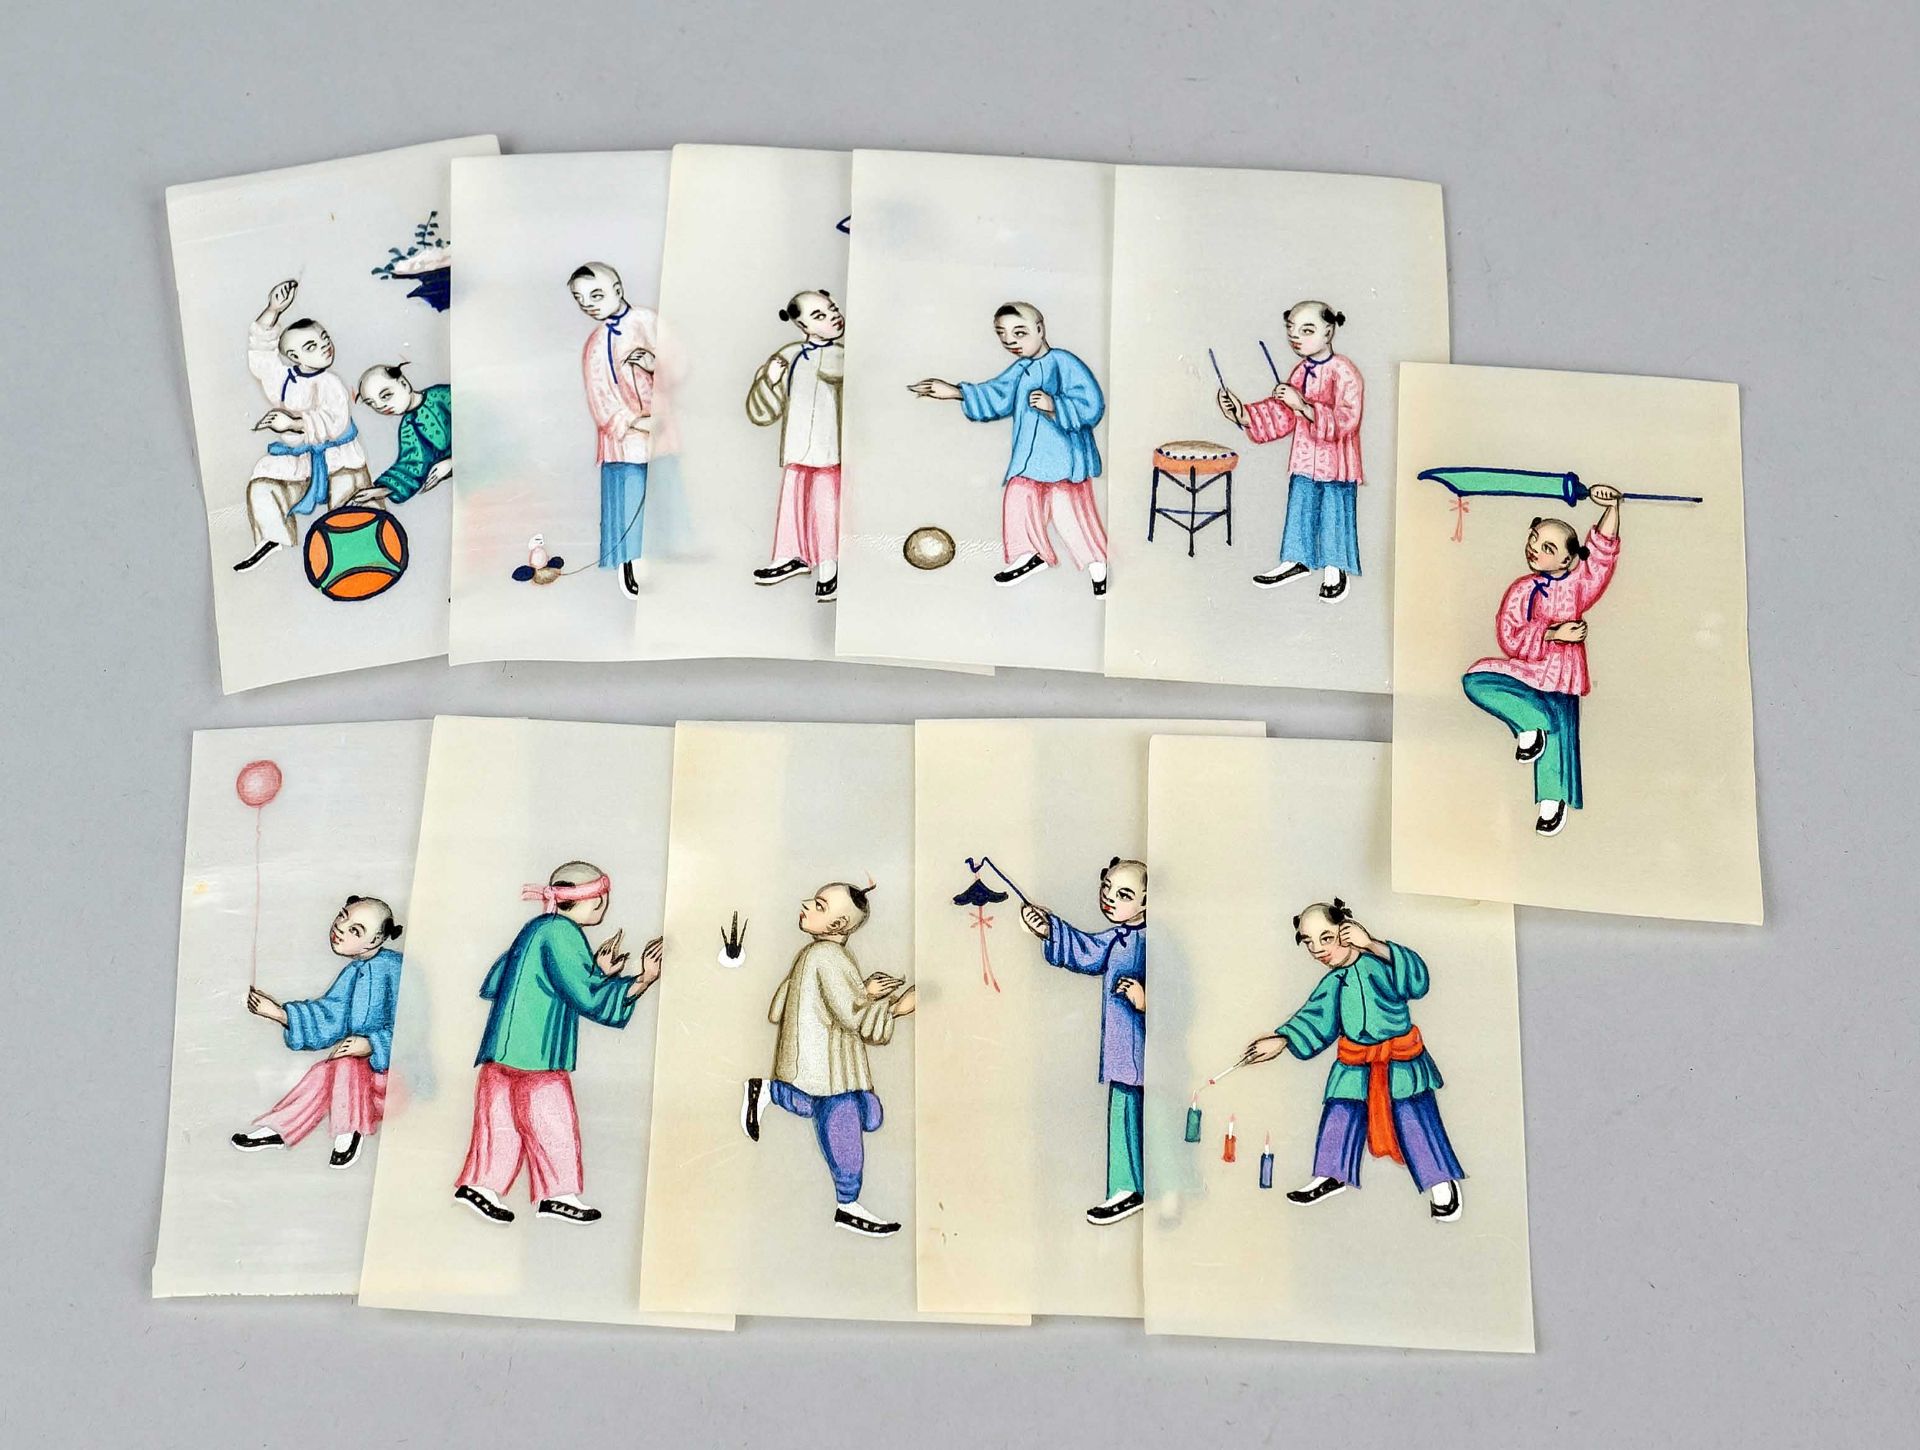 11 Pith paintings, China, Qing dynasty(1644-1911), 19th century, gouache on rice paper, children's